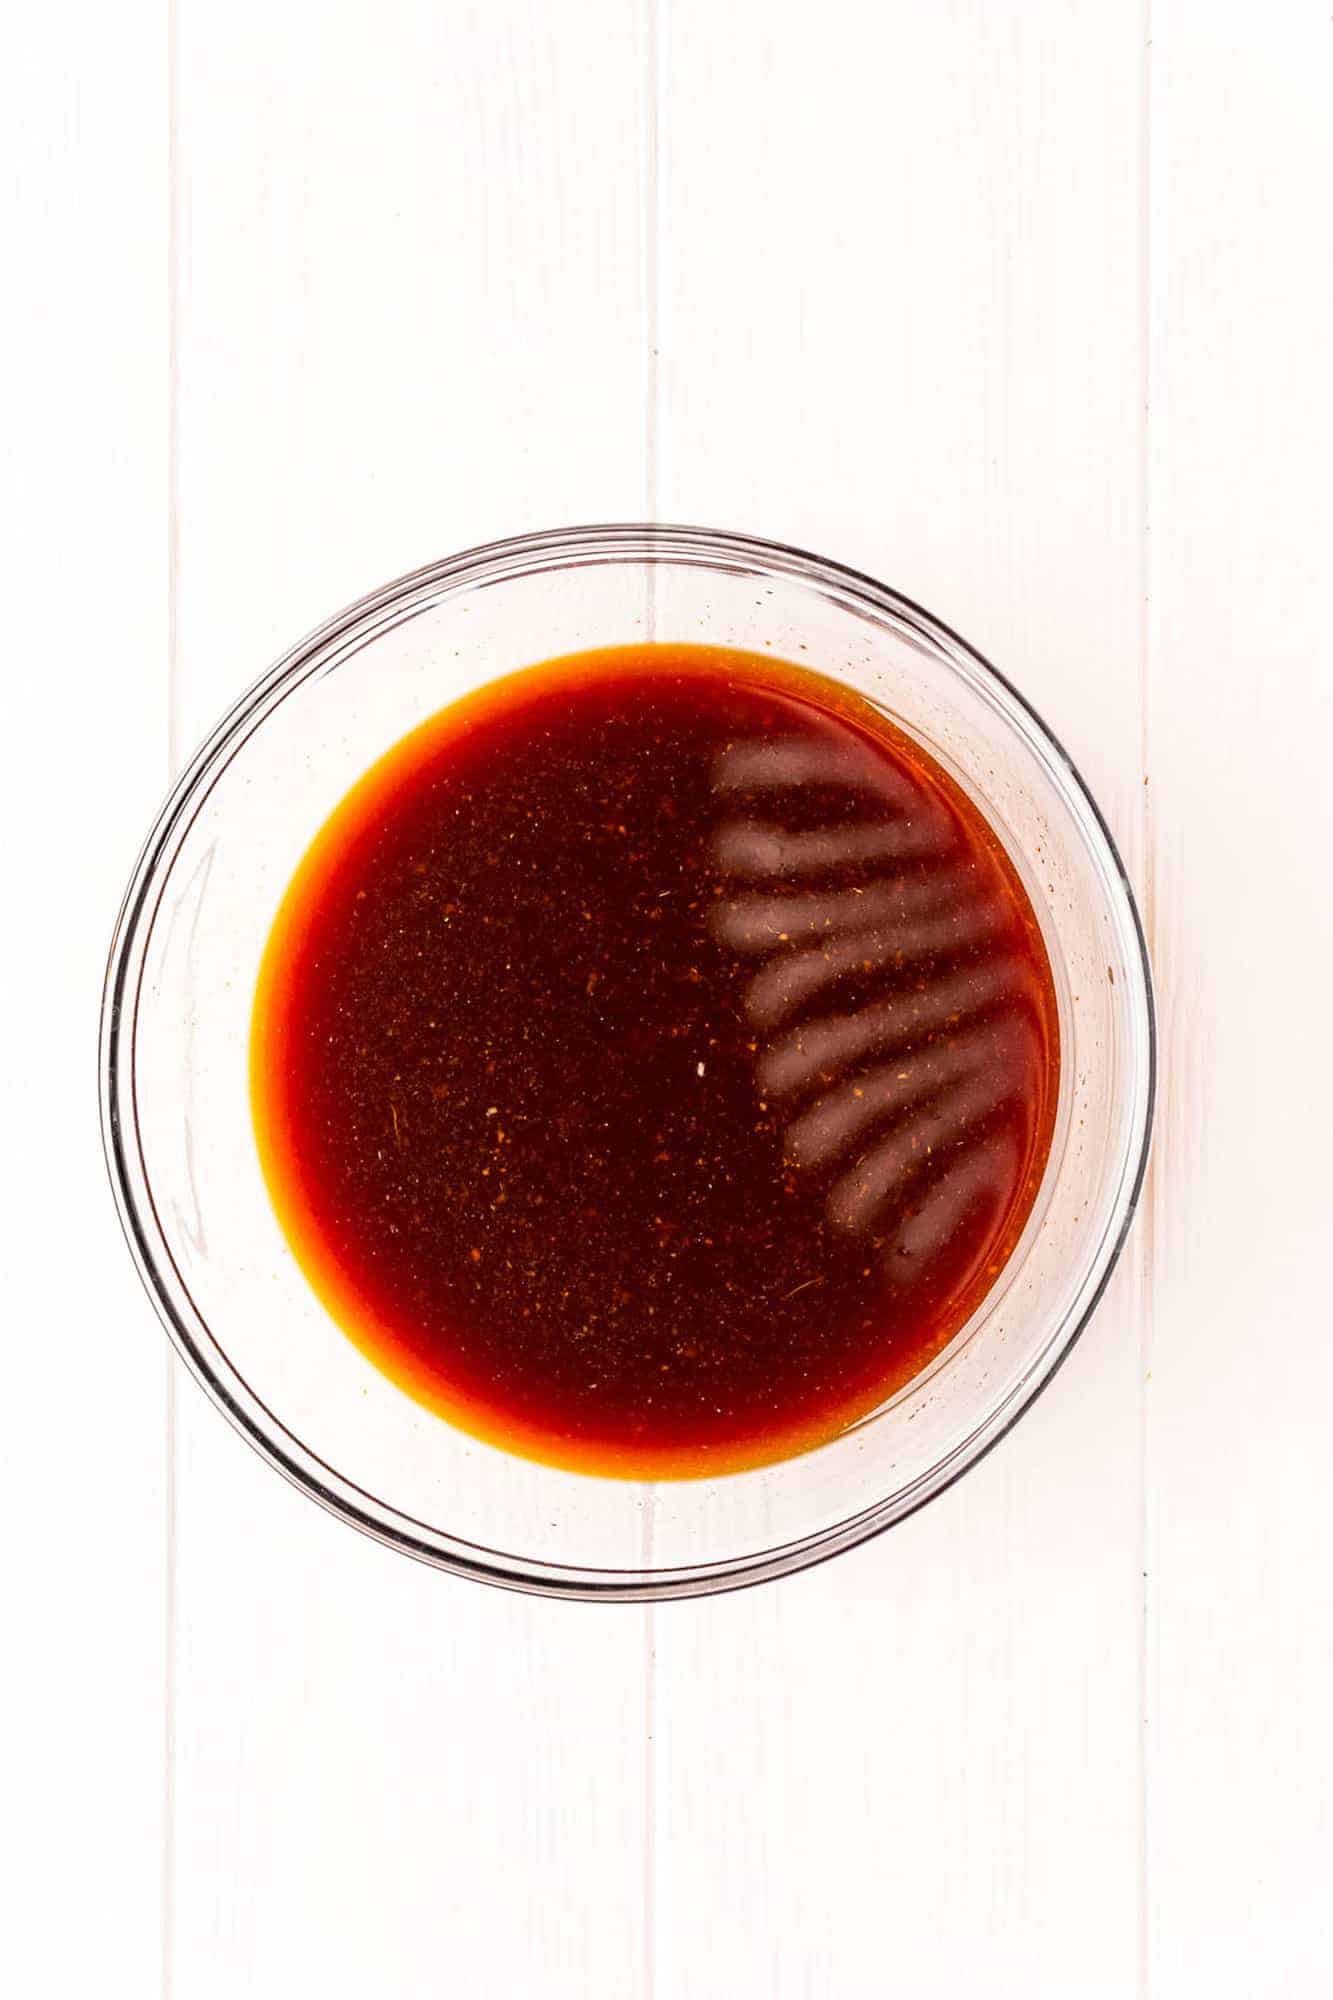 Dark brown sauce in a clear glass mixing bowl.